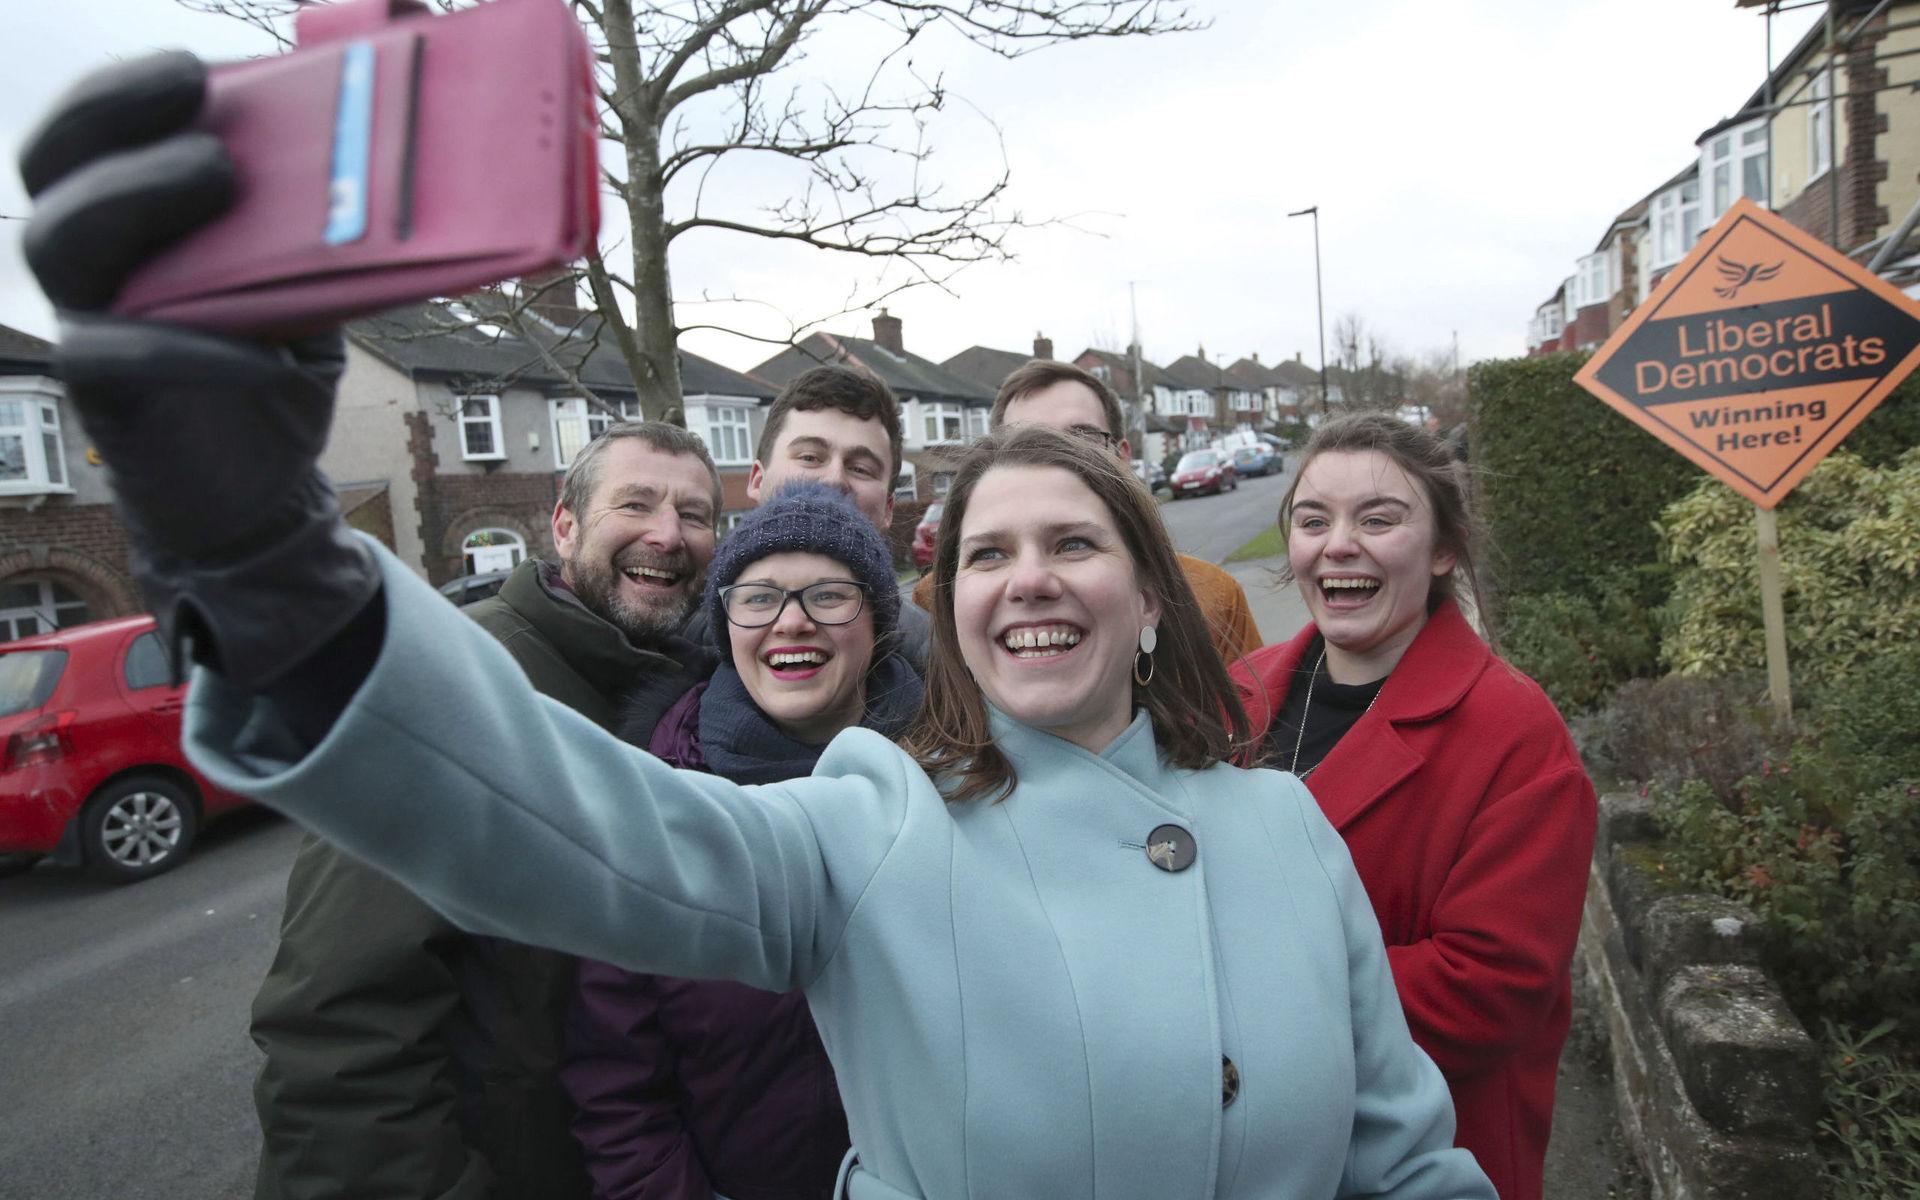 Liberal Democrat Leader Jo Swinson takes a selfie with supporters as she canvasses, while on the General Election campaign, in Sheffield, England, Sunday, Dec. 8, 2019. Britain goes to the polls on Dec. 12. (Danny Lawson/PA via AP)  AMB861